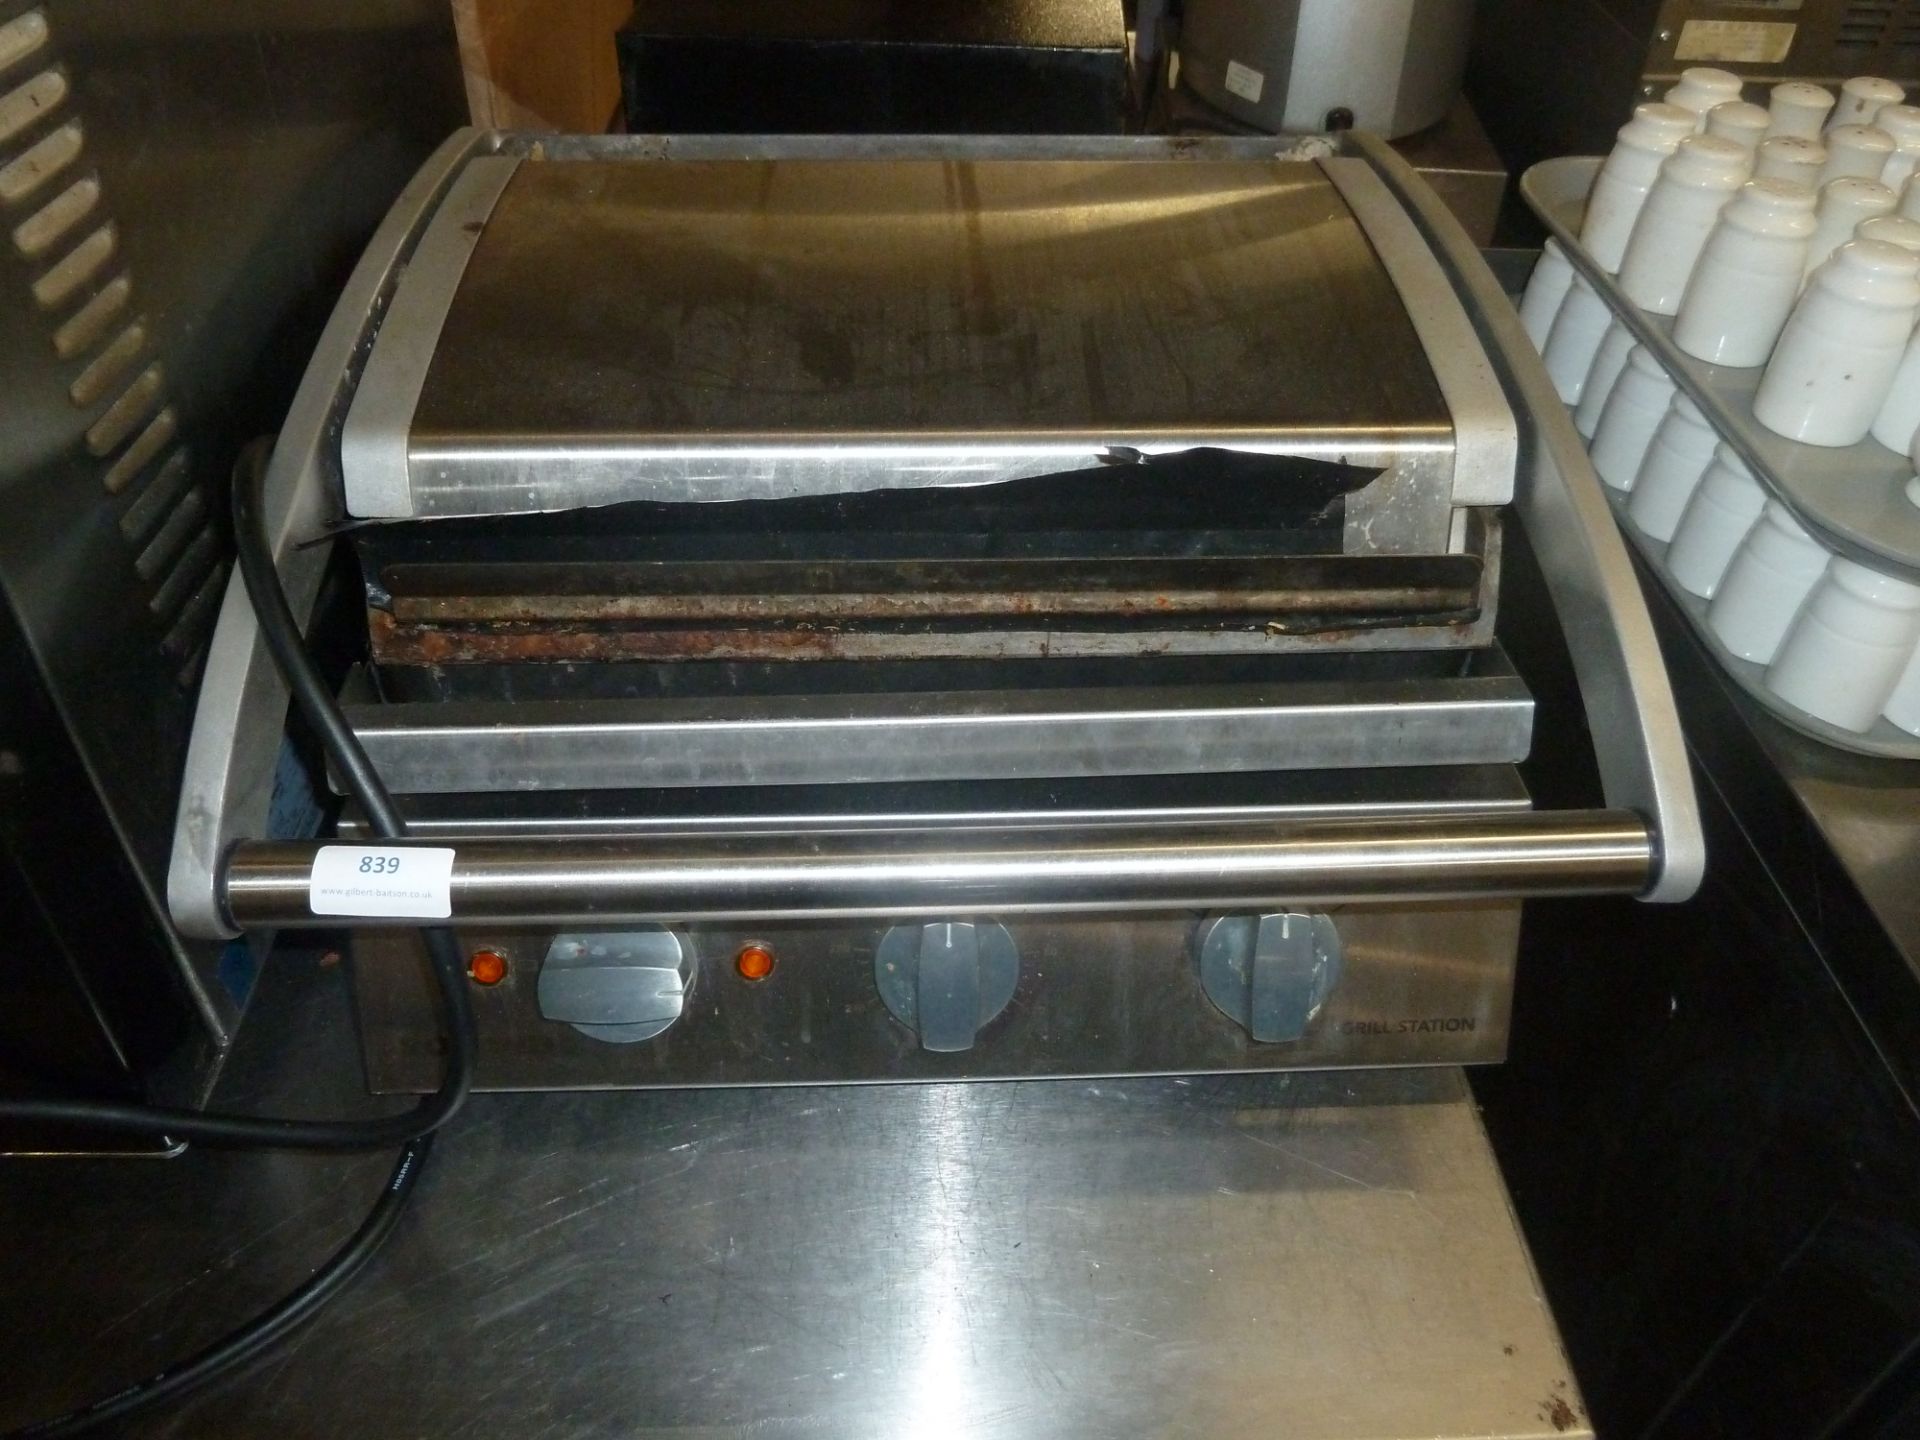 *Roband contact grill - single phase. 375w x 280d cooking area